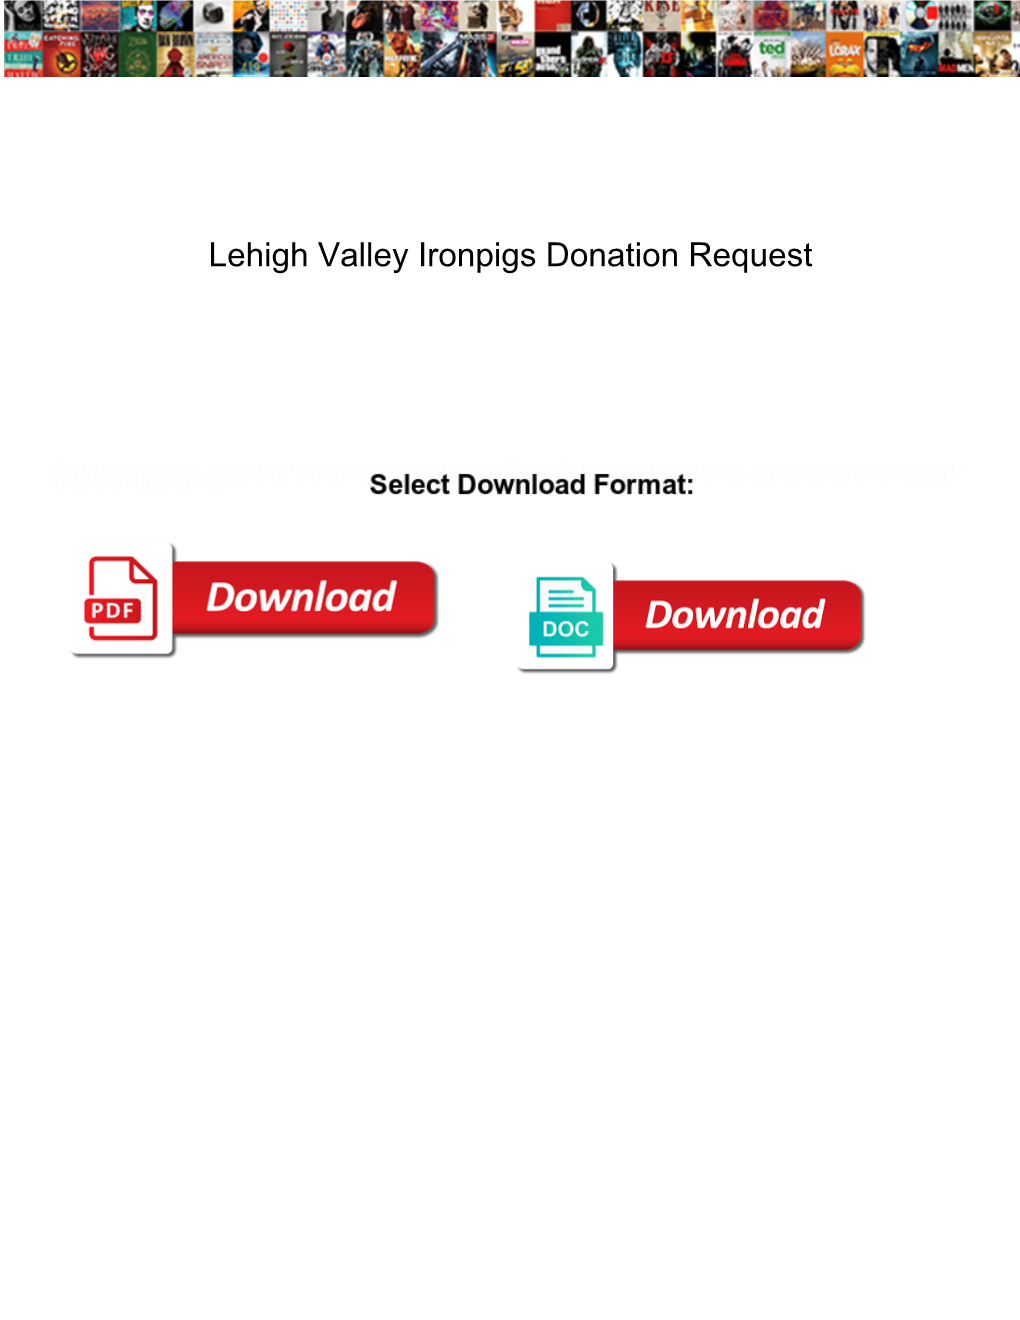 Lehigh Valley Ironpigs Donation Request Fission